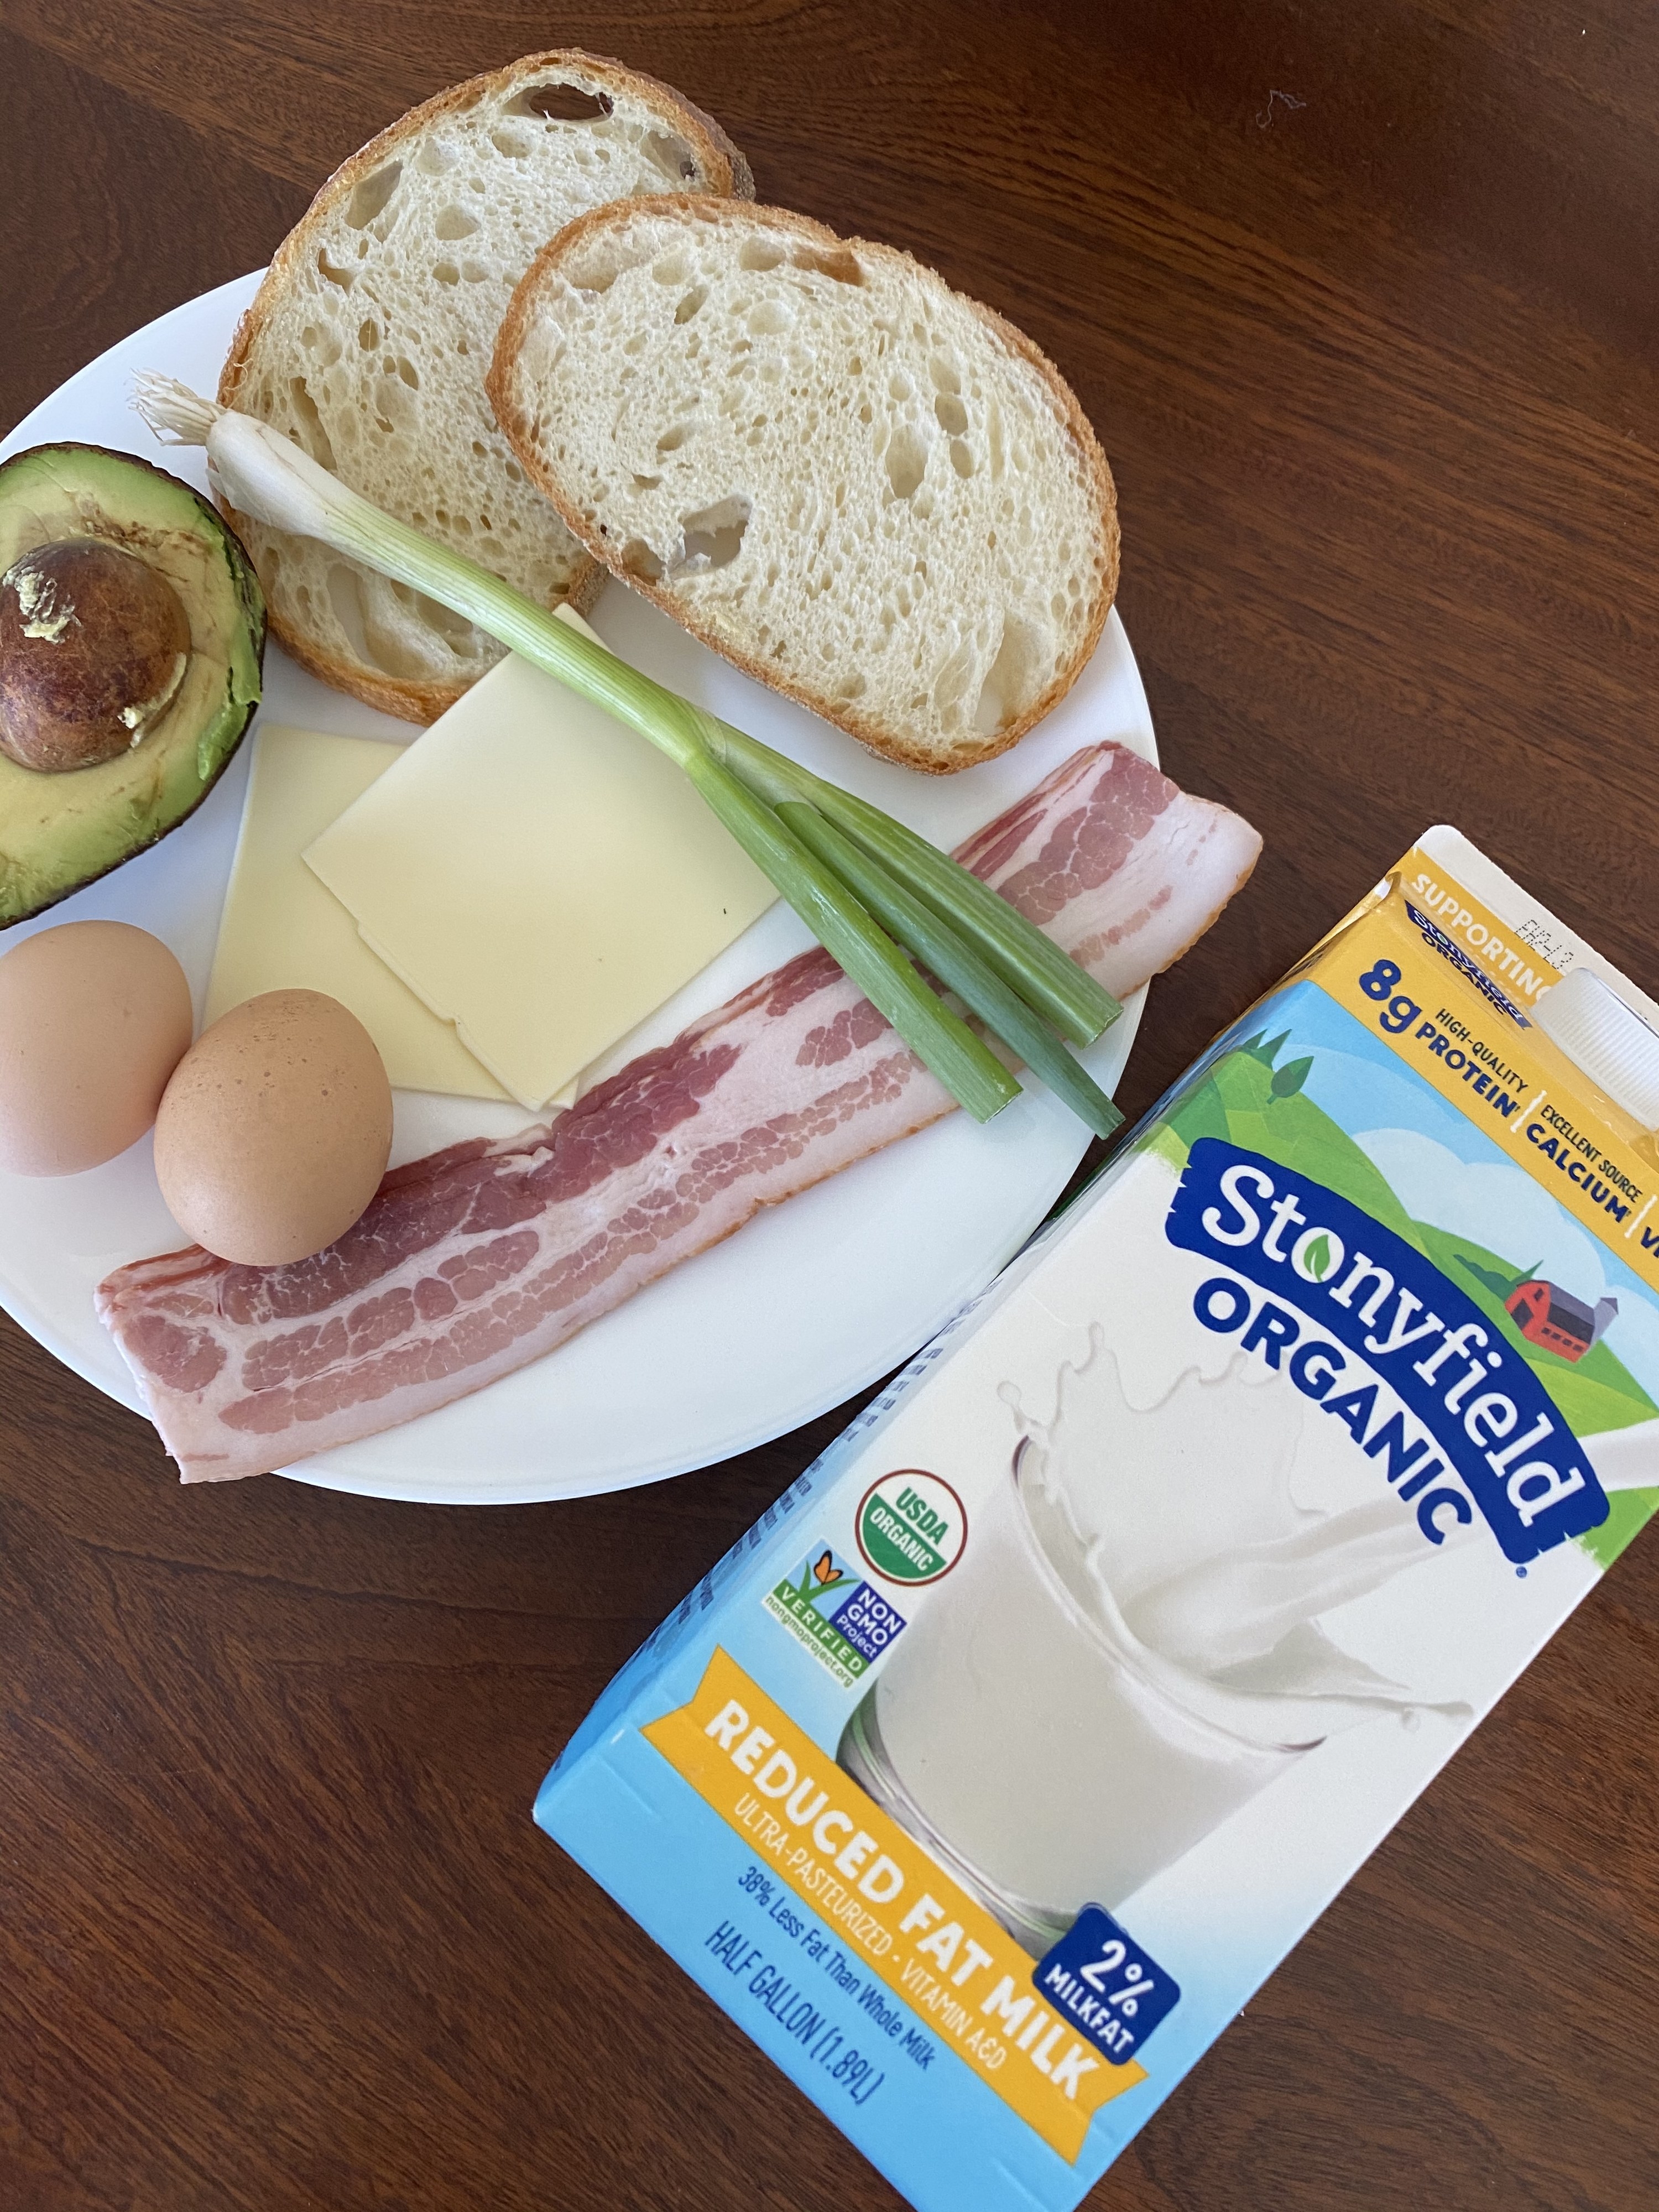 Ingredients for a breakfast sandwich on a countertop, including bread, eggs, bacon, cheese, scallions, avocado, and milk.